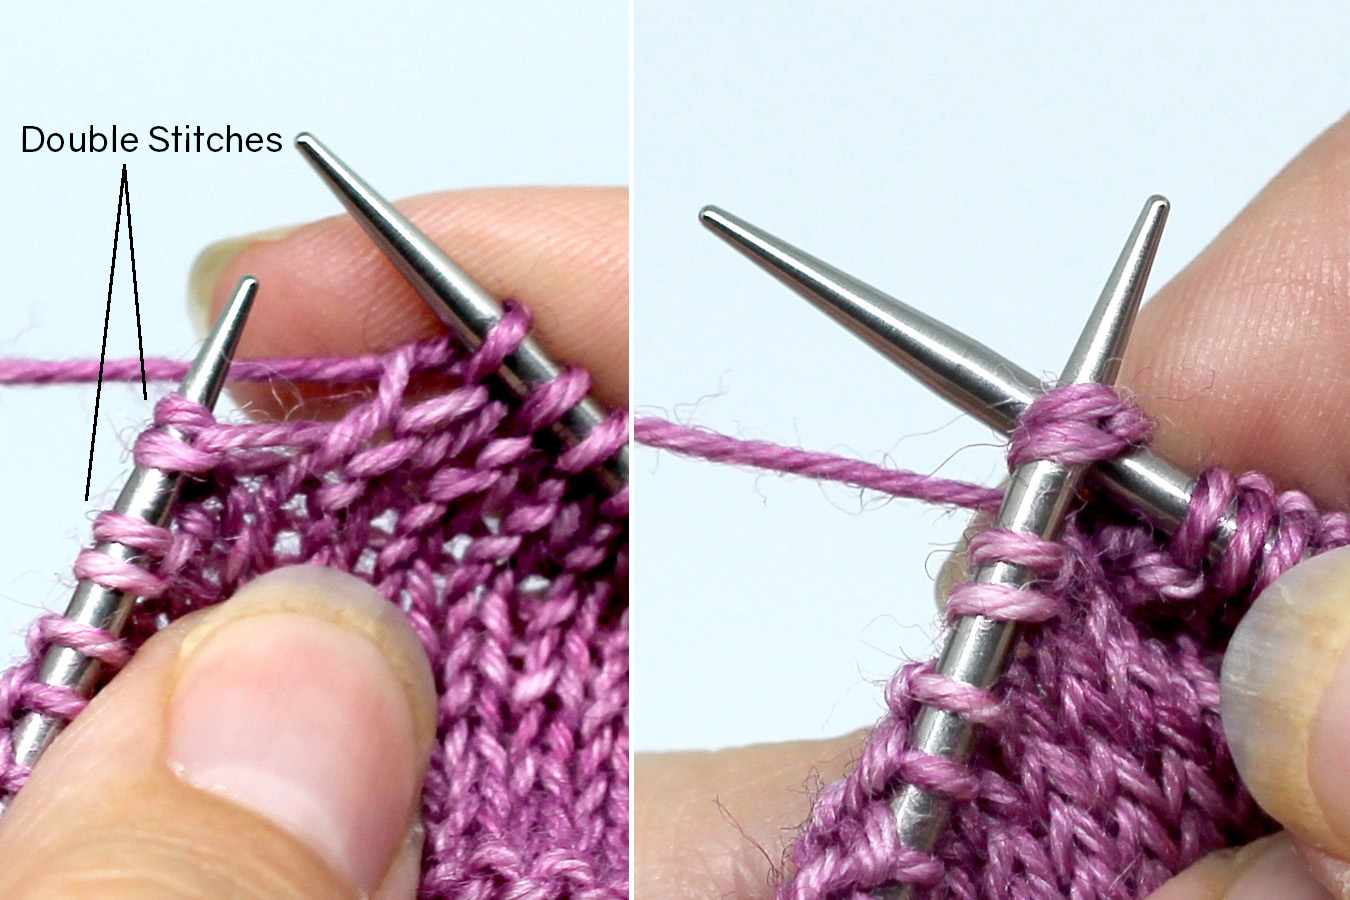 Two images showing the knit side of a piece of knitting. Left image: The double stitch formed in step 3 is on the left-hand needle. Right Image - The double stitch is being worked with both legs at once, like a k2tog